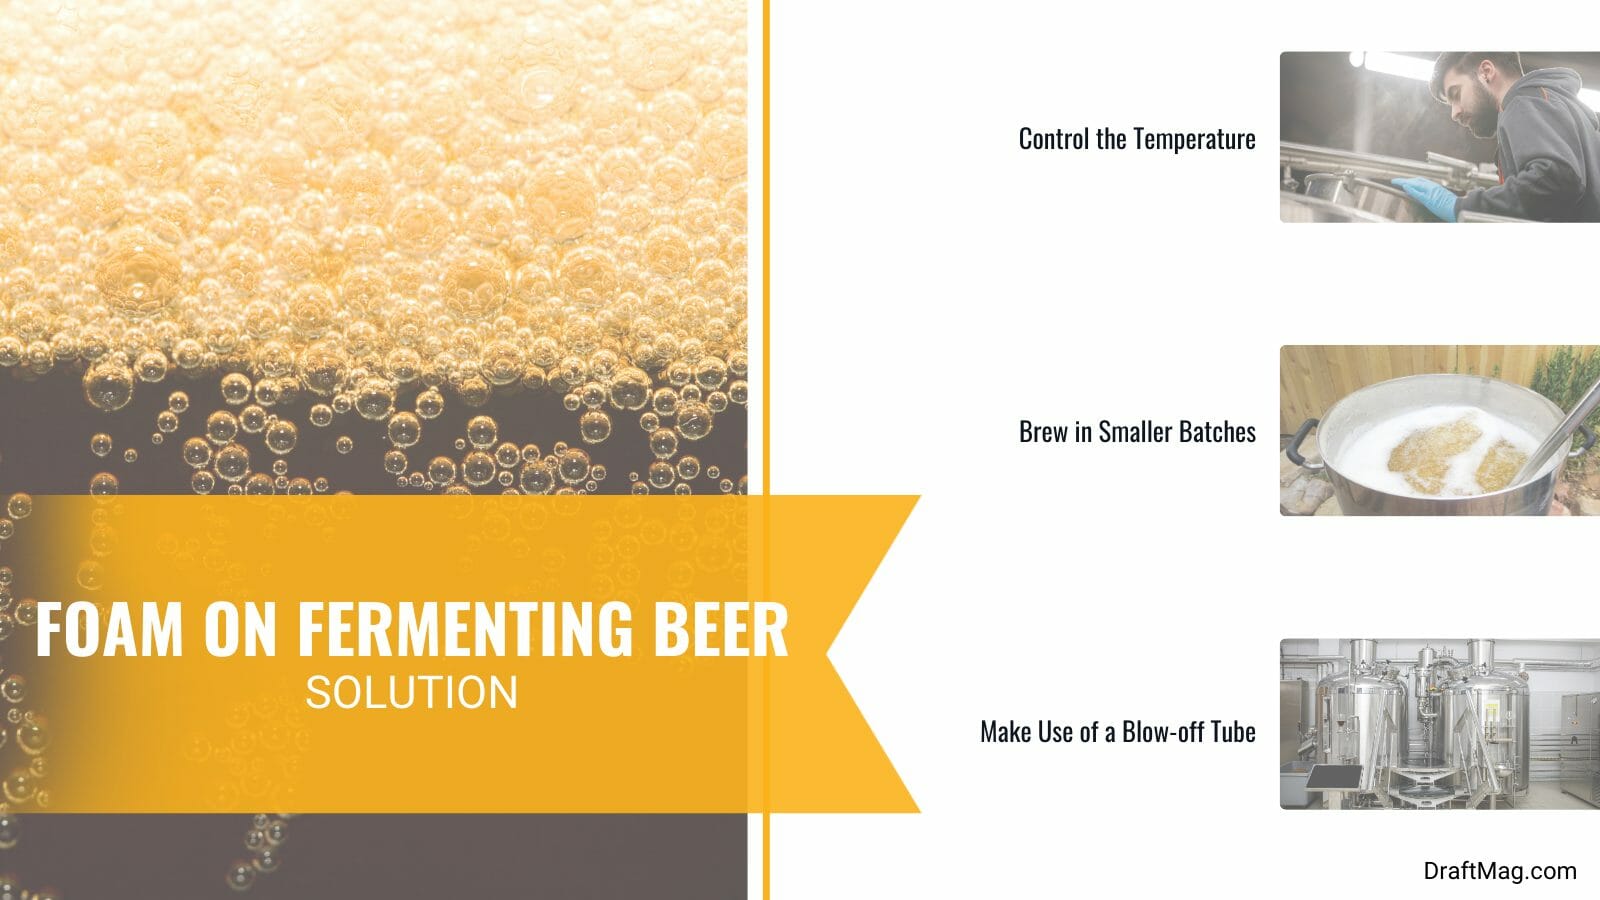 Solutions of Foam on Fermenting Beer